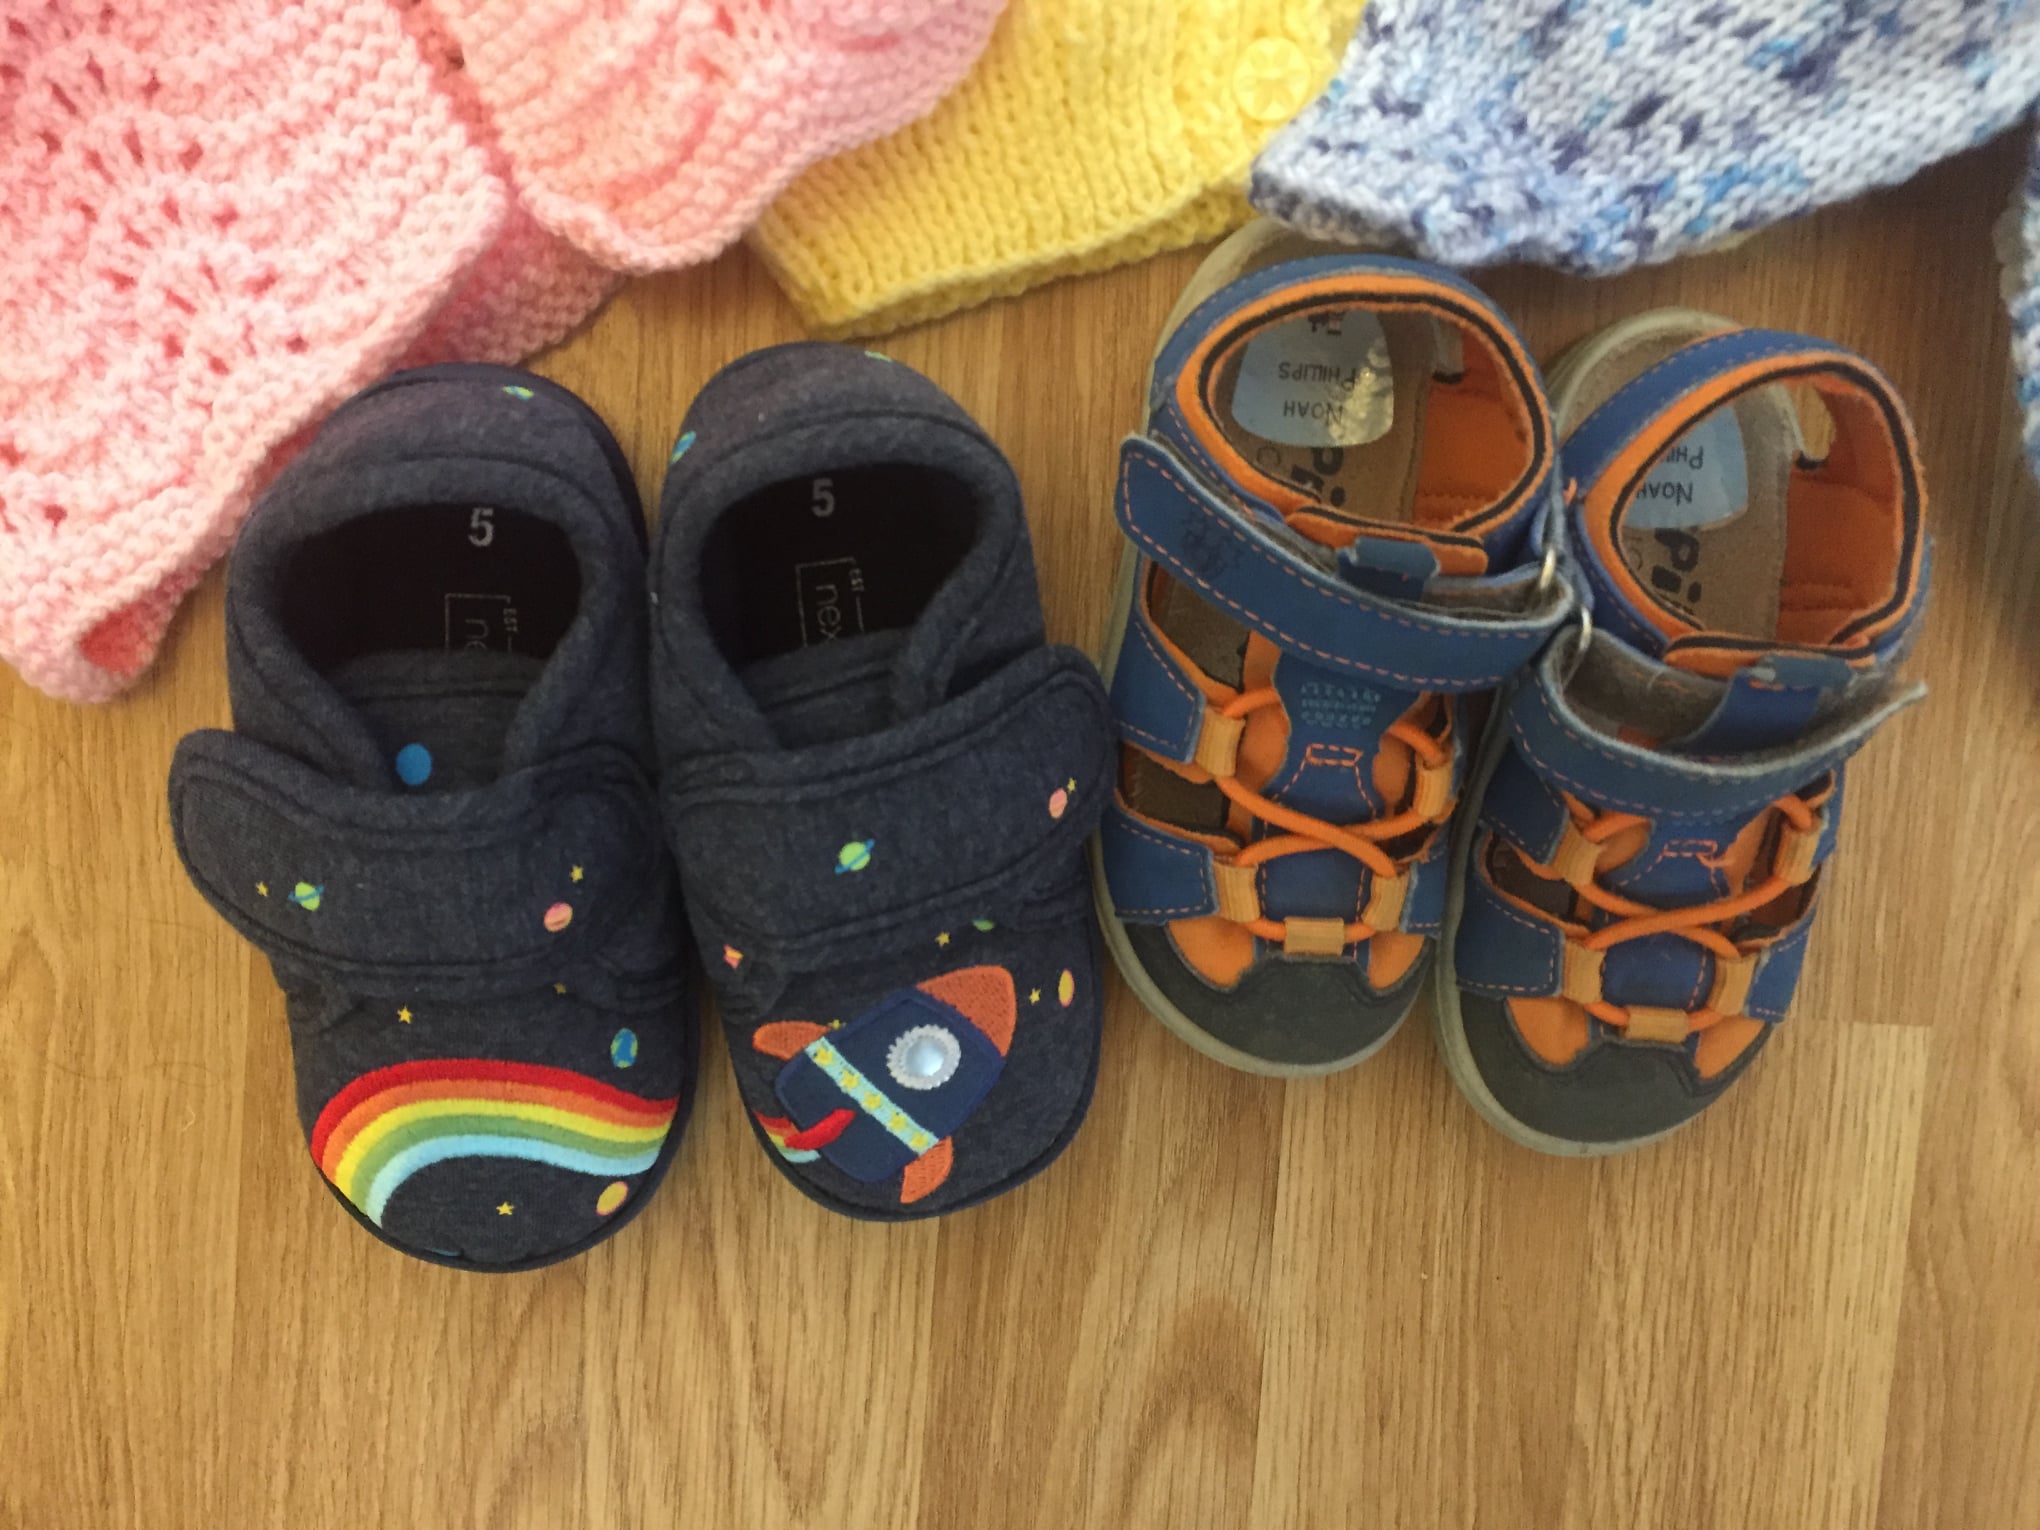 Tiny shoes donated